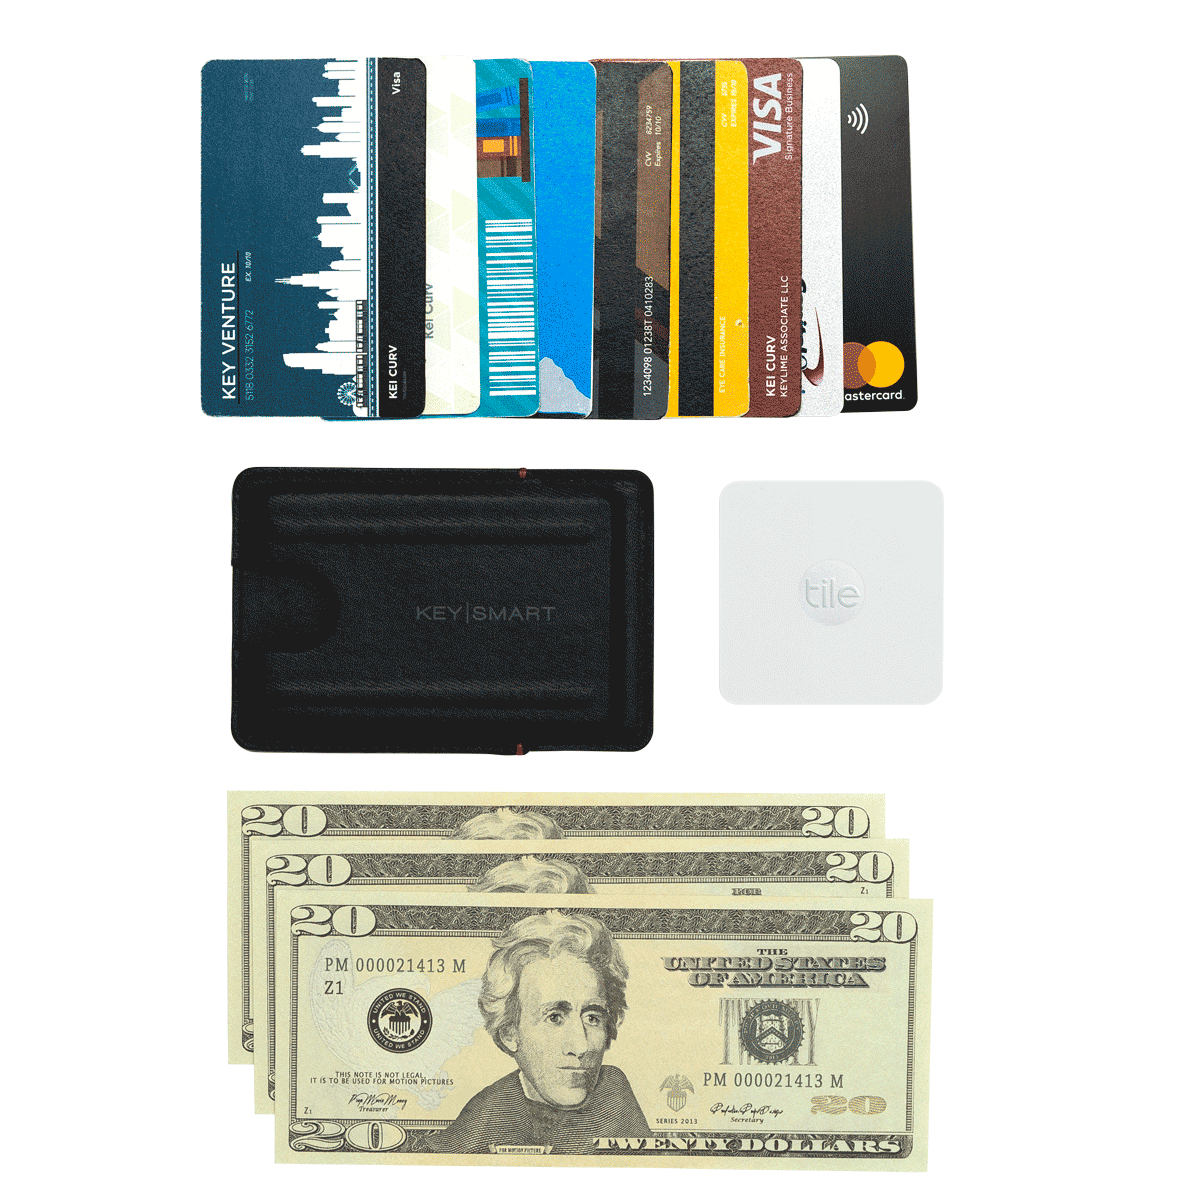 2-in-1 Stainless Steel Smart Money Clip & Credit Card Holder